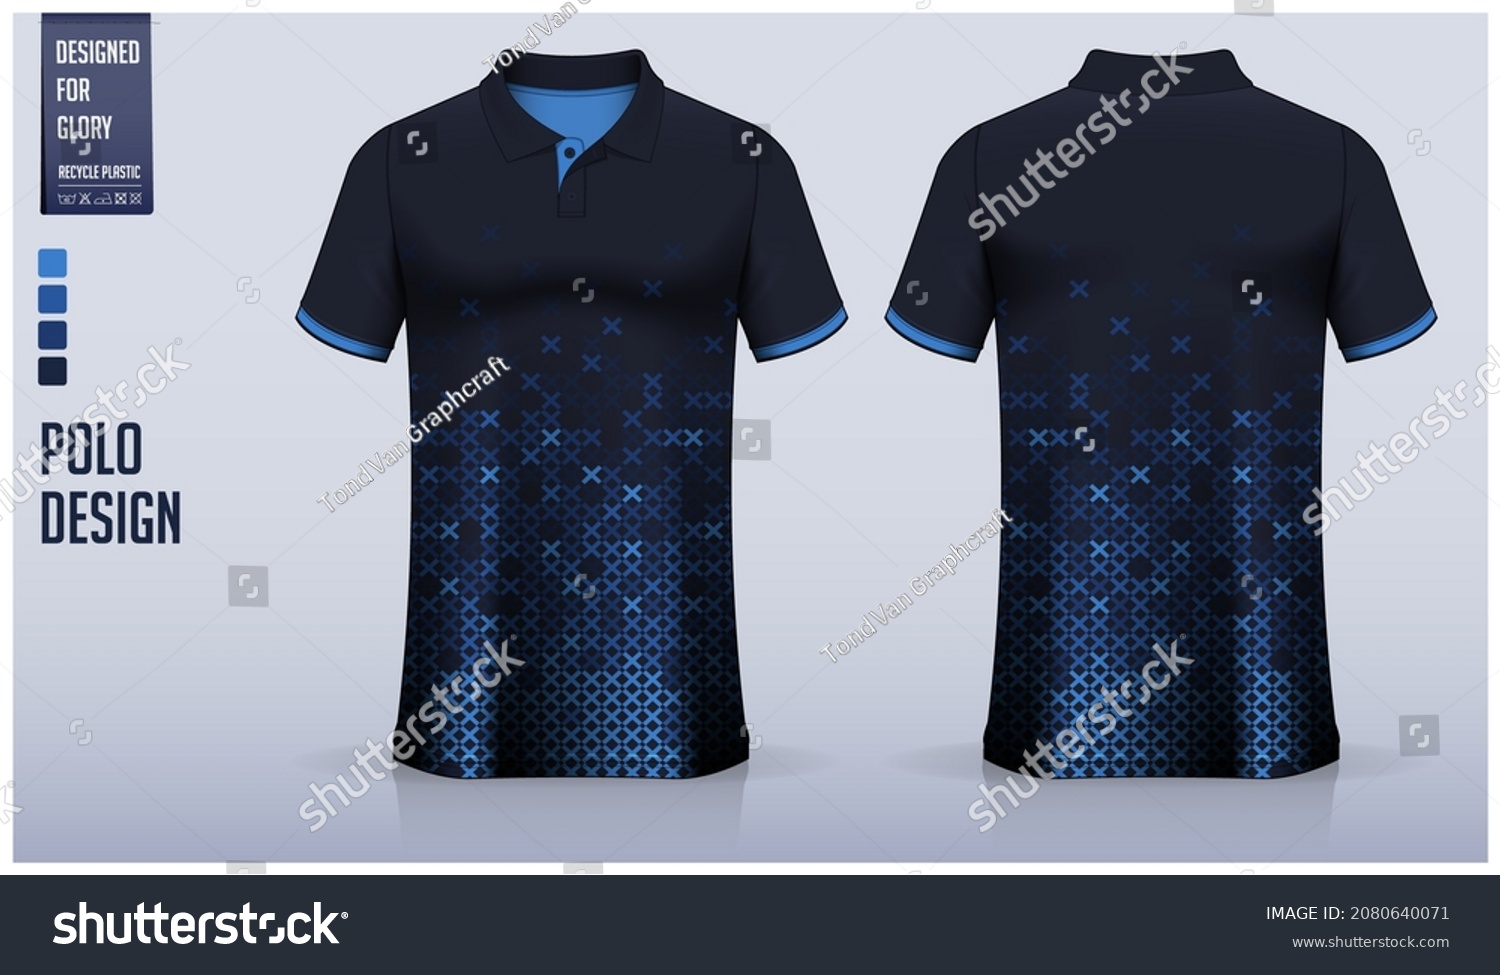 2,066 Kit polo Images, Stock Photos & Vectors | Shutterstock